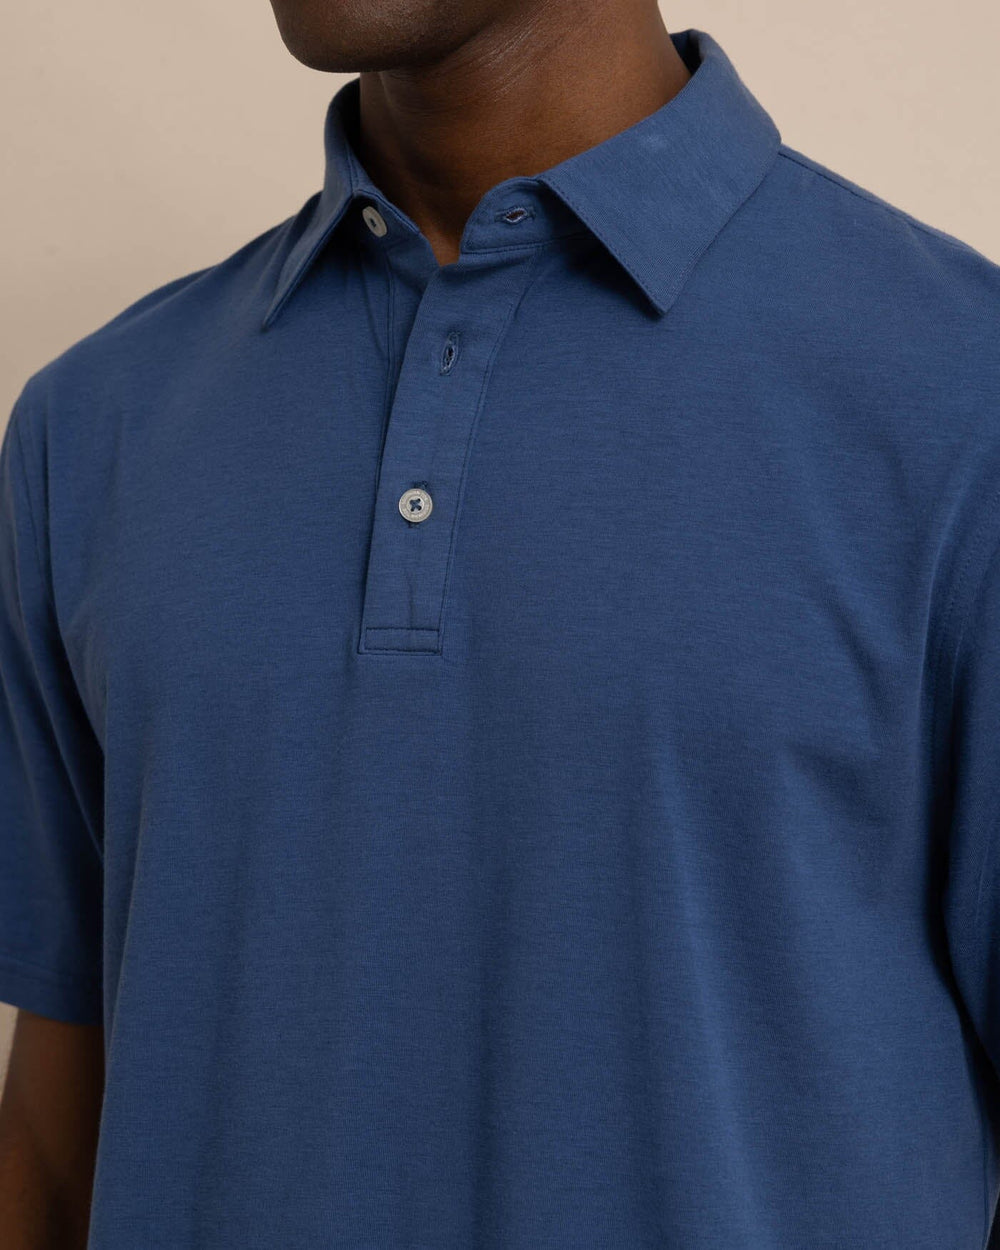 The detail view of the Southern Tide The Seaport Polo by Southern Tide - Aged Denim